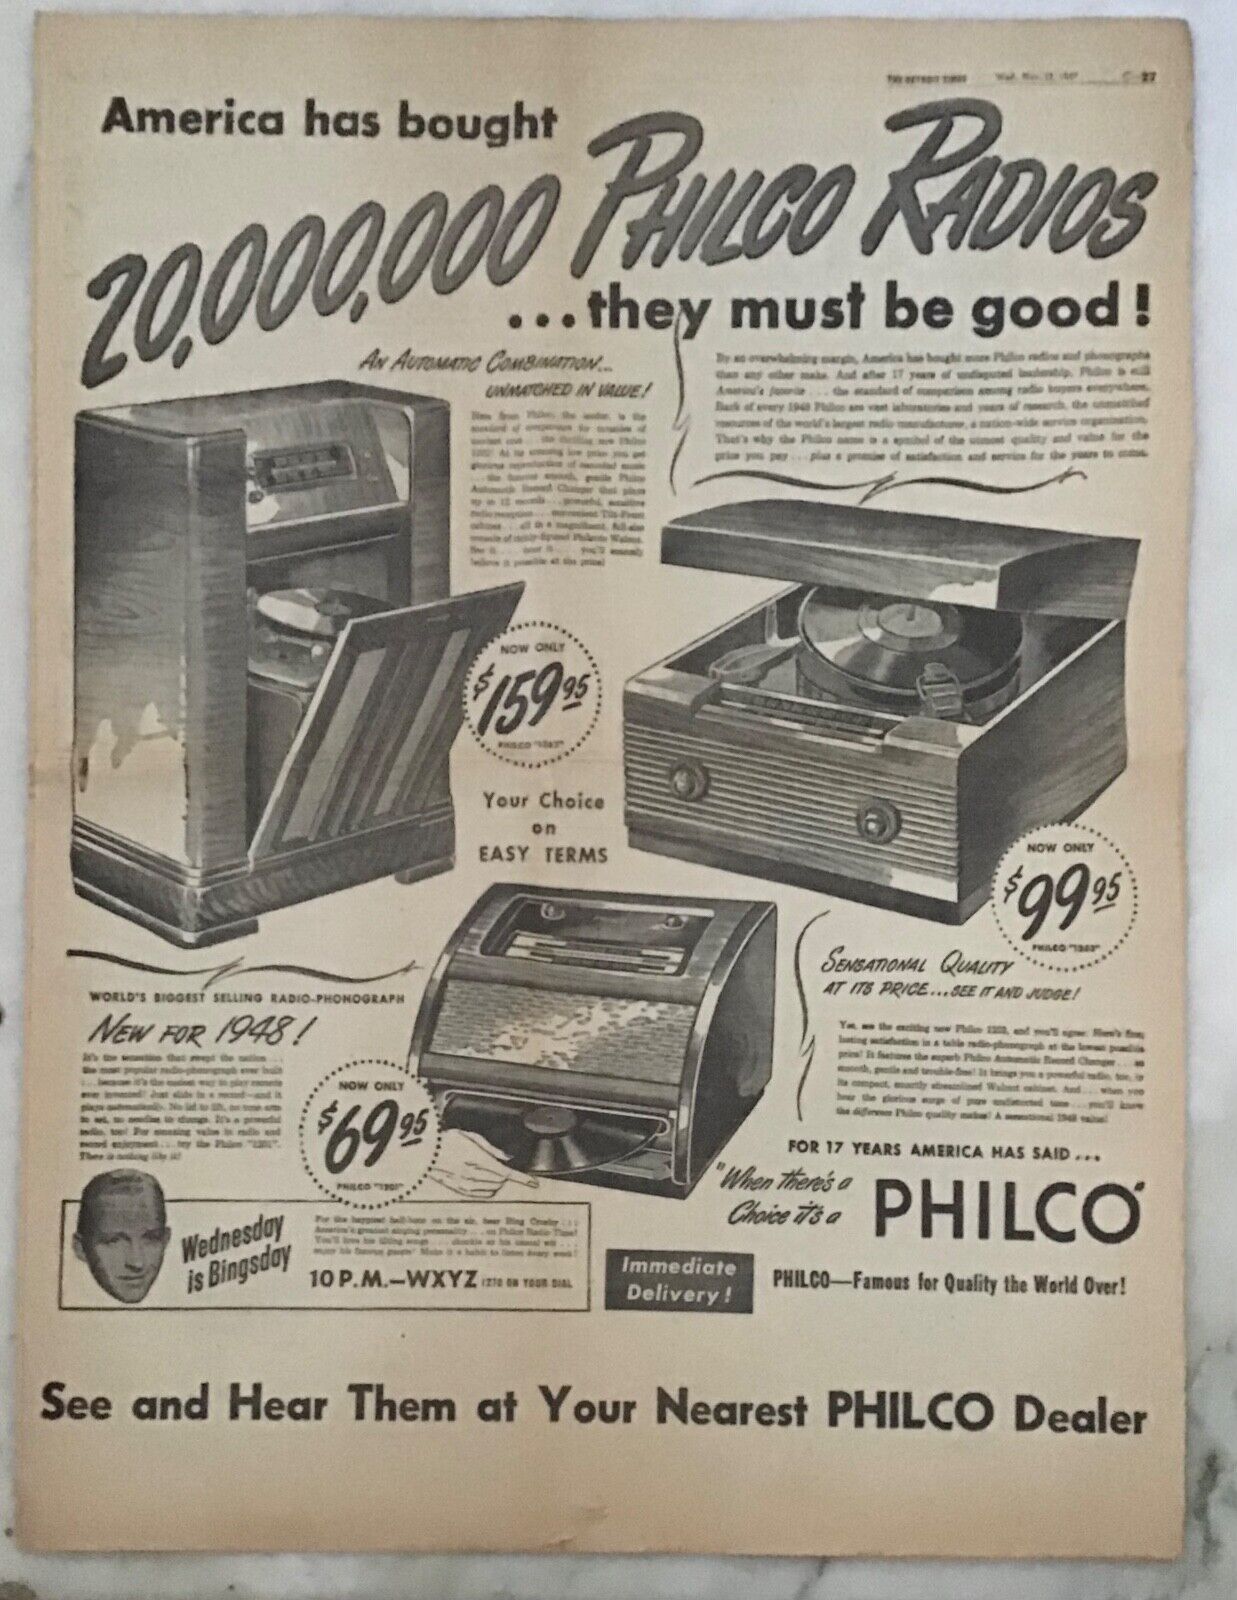 1948 full page newspaper ad for Philco Radio Phonos - models 1262, 1201, 1253